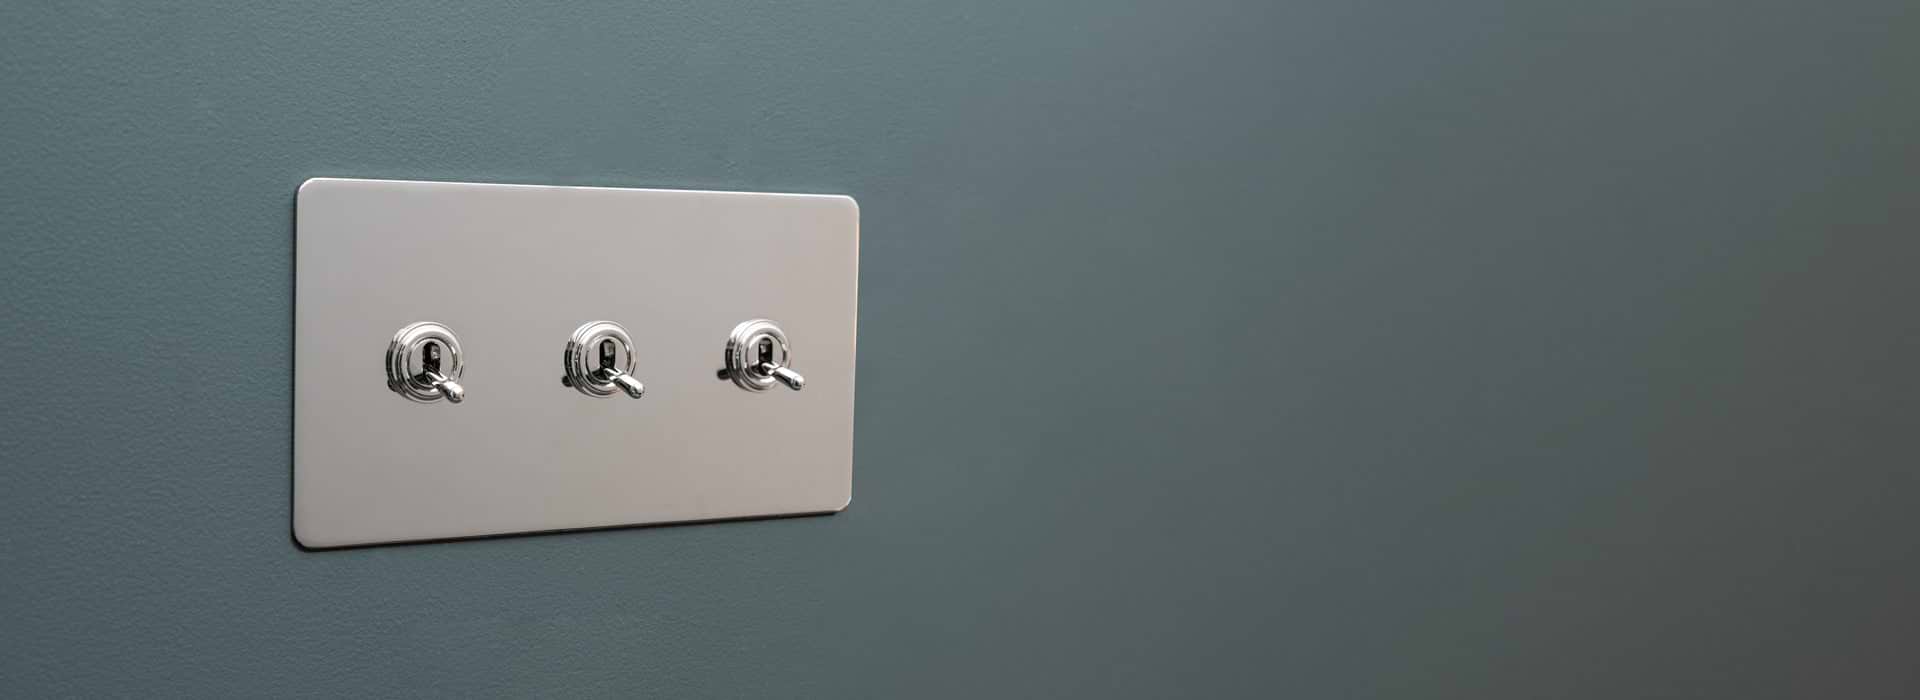 3 Toggle polished nickel switch by Corston on Grey background